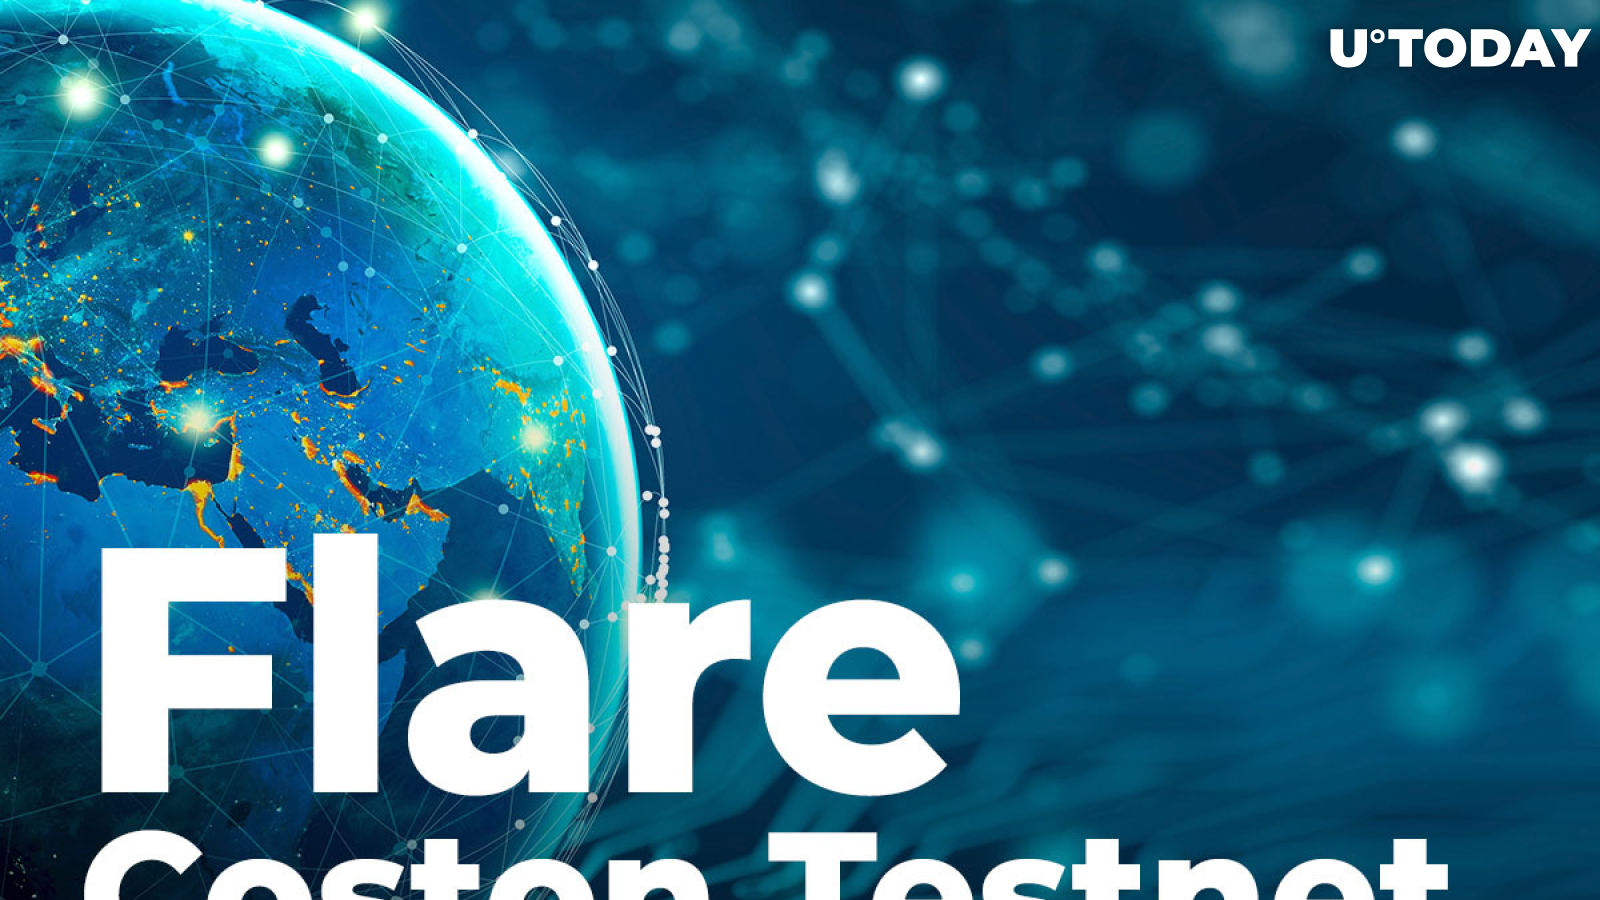 Flare Upgrades Its Coston Testnet While Its First DeFi Revamps Public Beta: Details